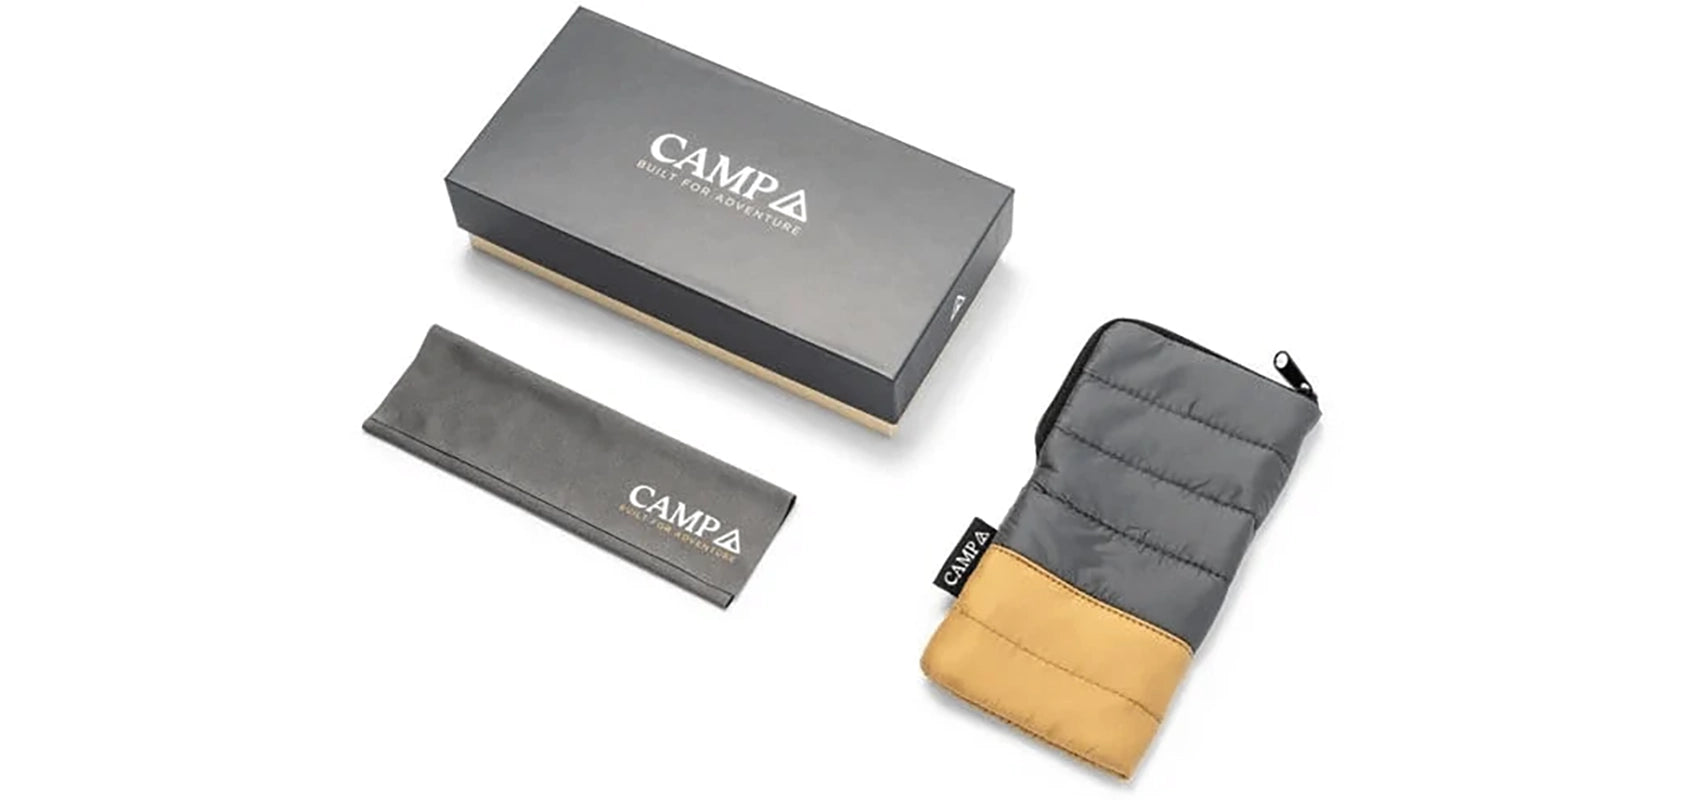 Shwood Camp Sunglasses packaging showing Box, sunglasses pouch and cleaning cloth